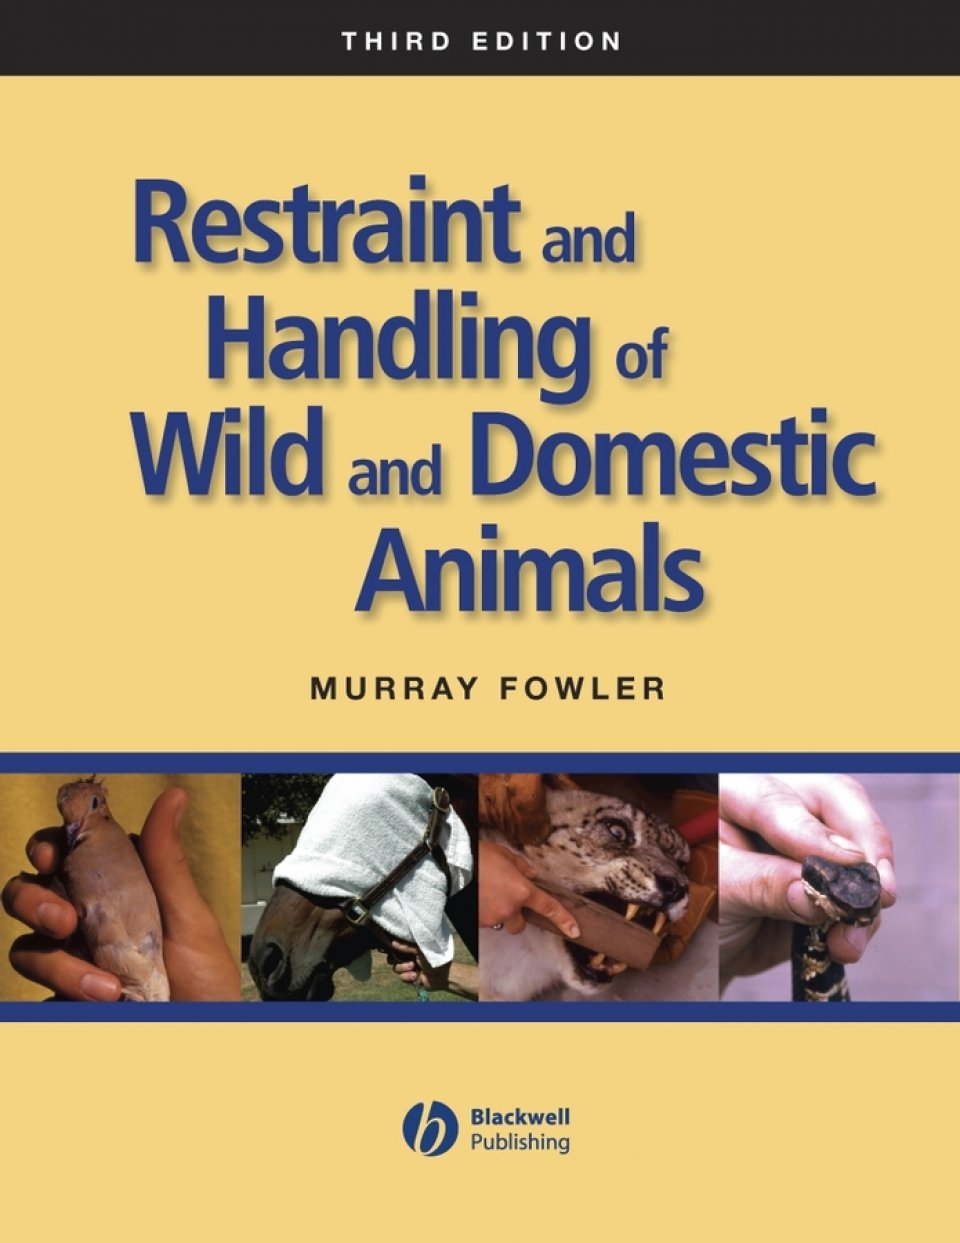 restraint and handling of wild and domestic animals book